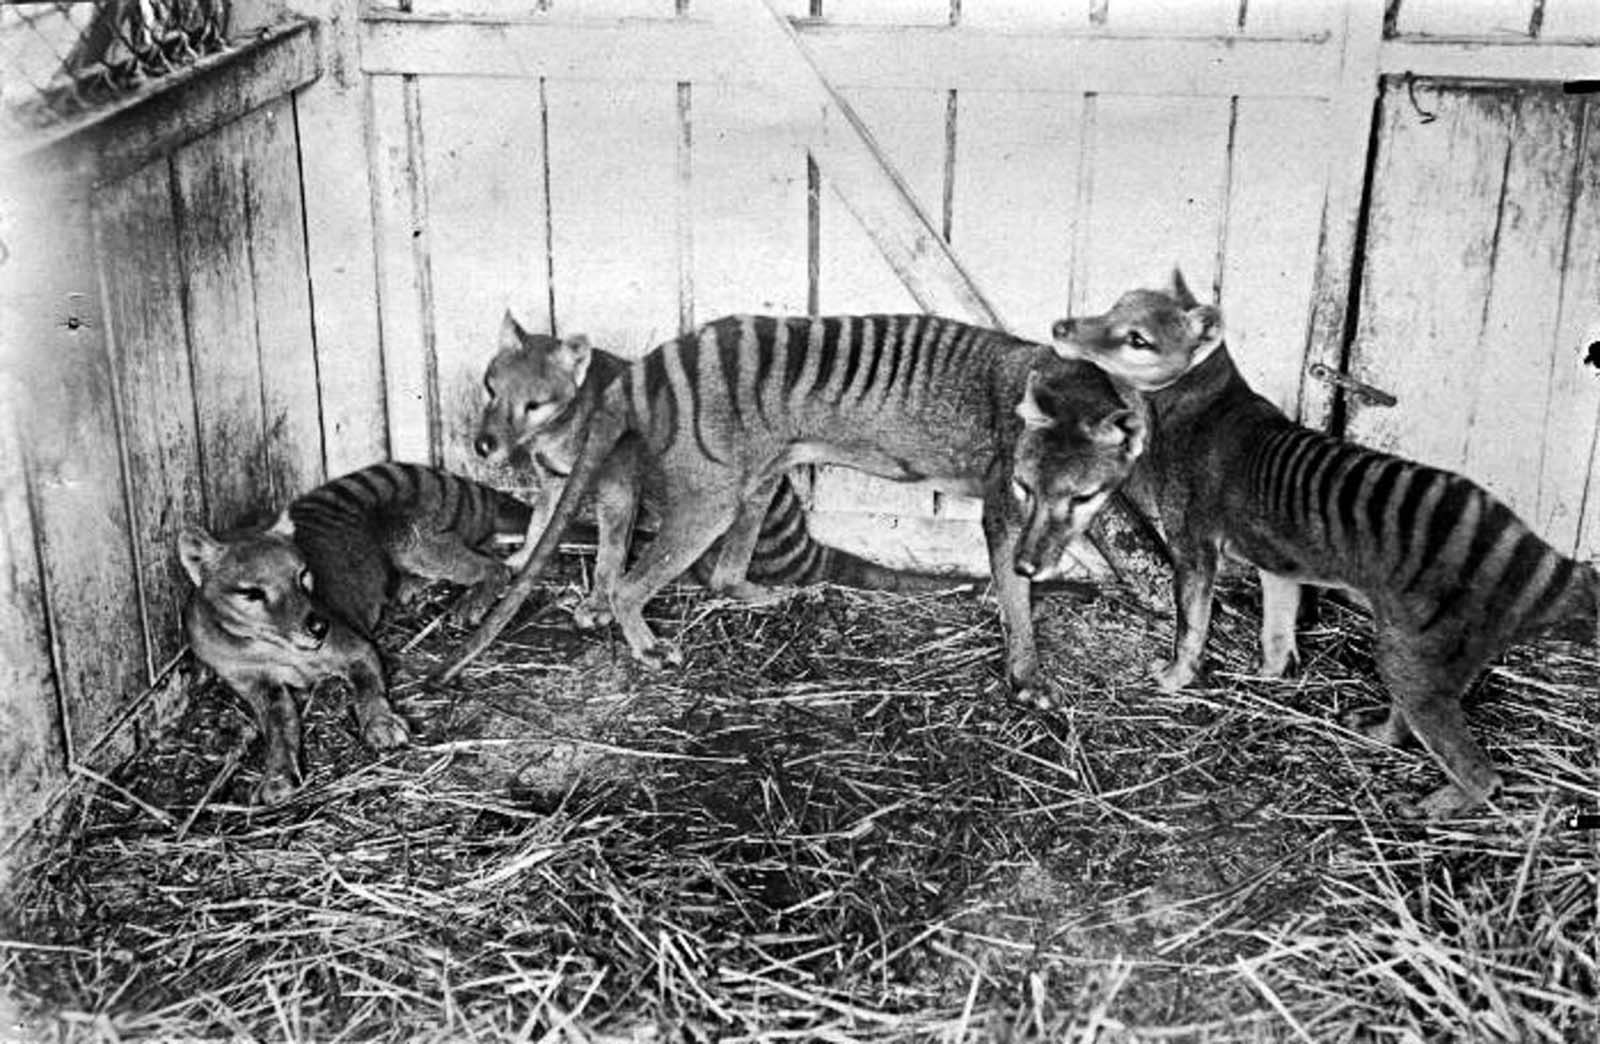 A family of thylacines at the Hobart Zoo. 1910.